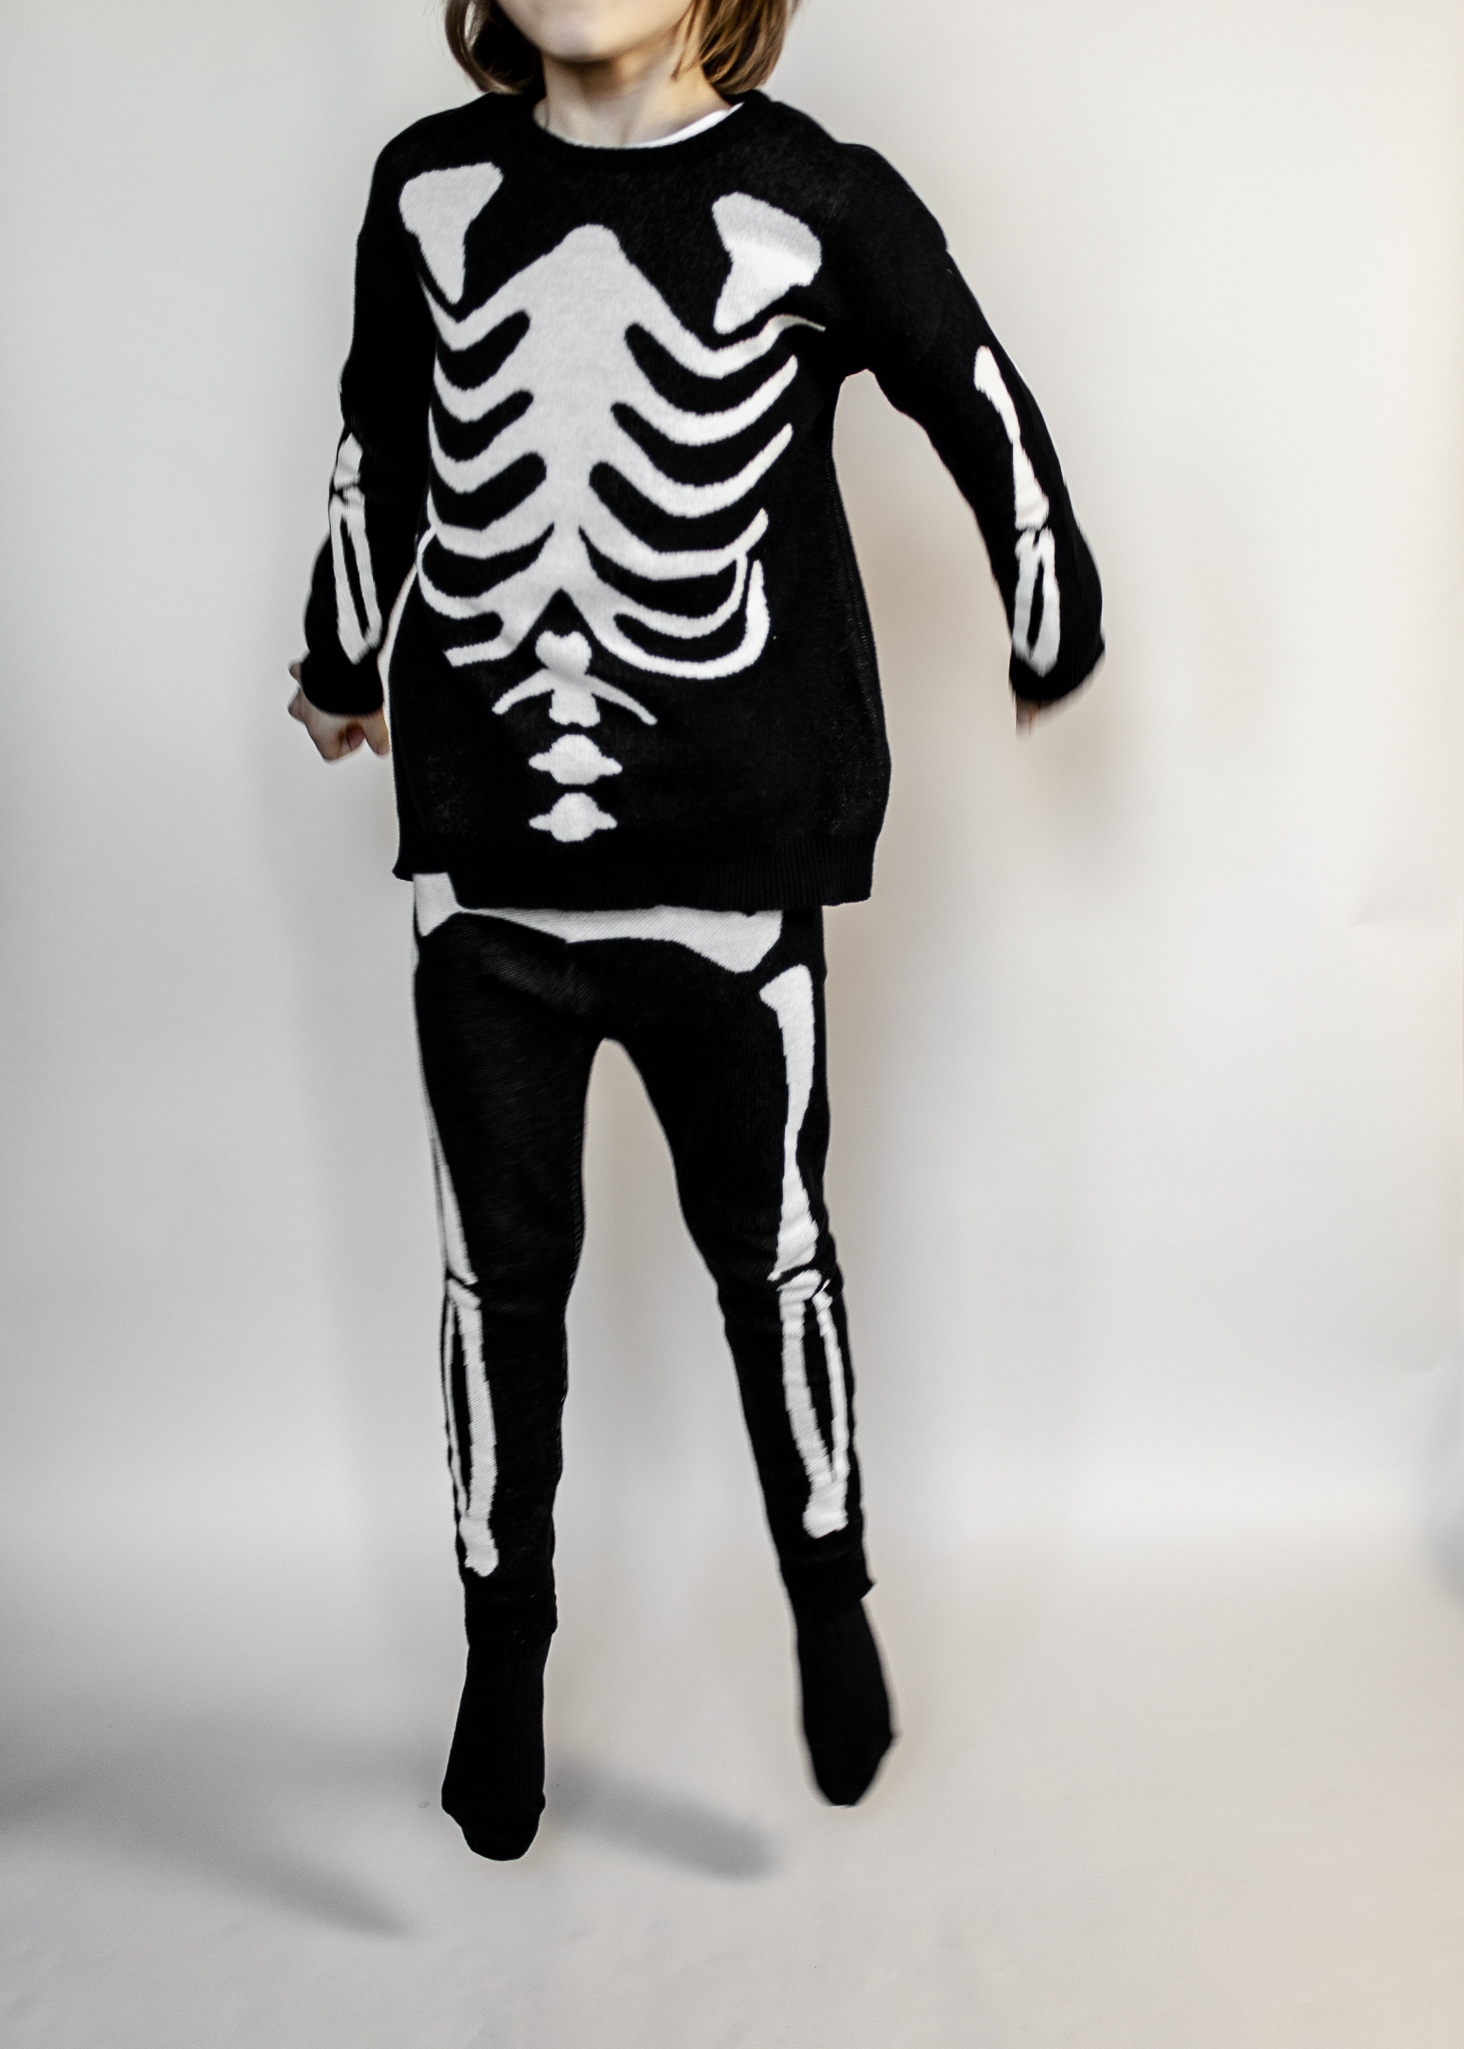                                                                                                                       Knit Tracked Suit Pants - Skeleton